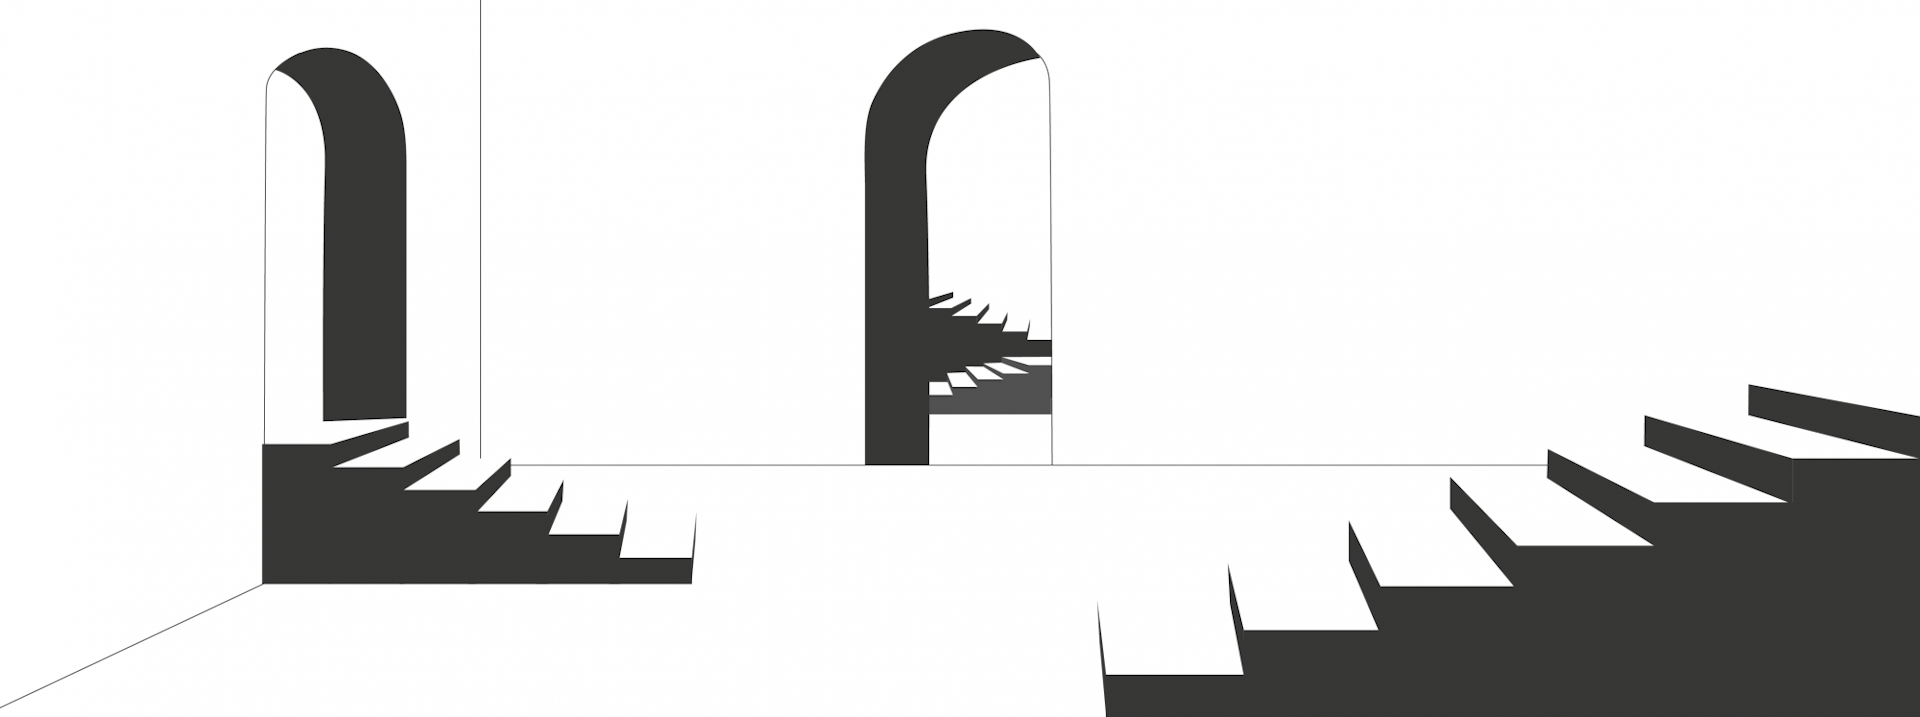 An illustration of two open archways with steps leading up to them, with another set of steps in the foreground.